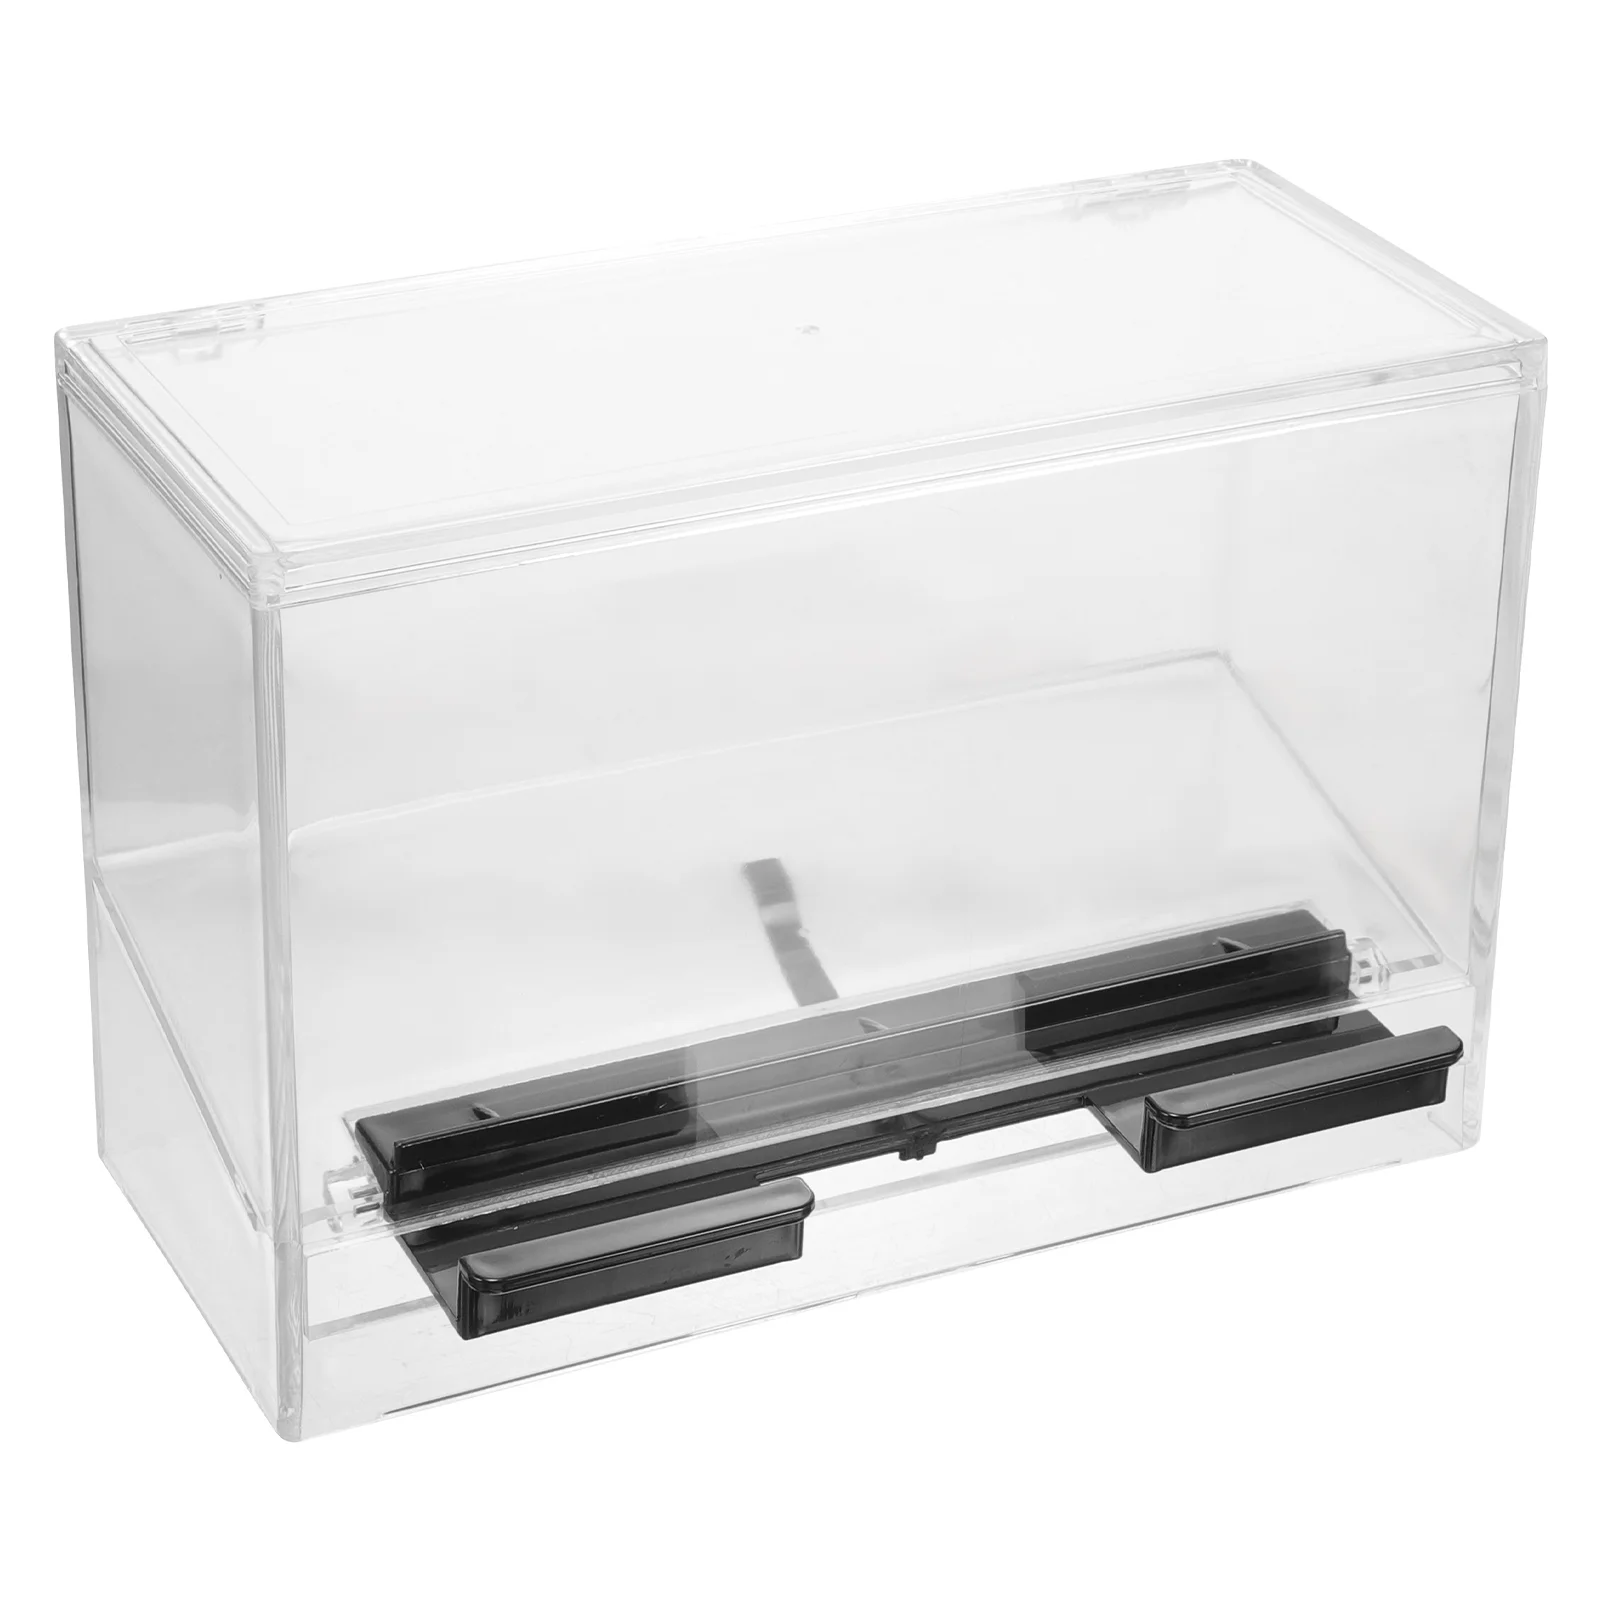 

Self-service Straw Box Storage Case Restaurant Dispenser Counter Reusable Drinking Straws Holder Clear Plastic Containers